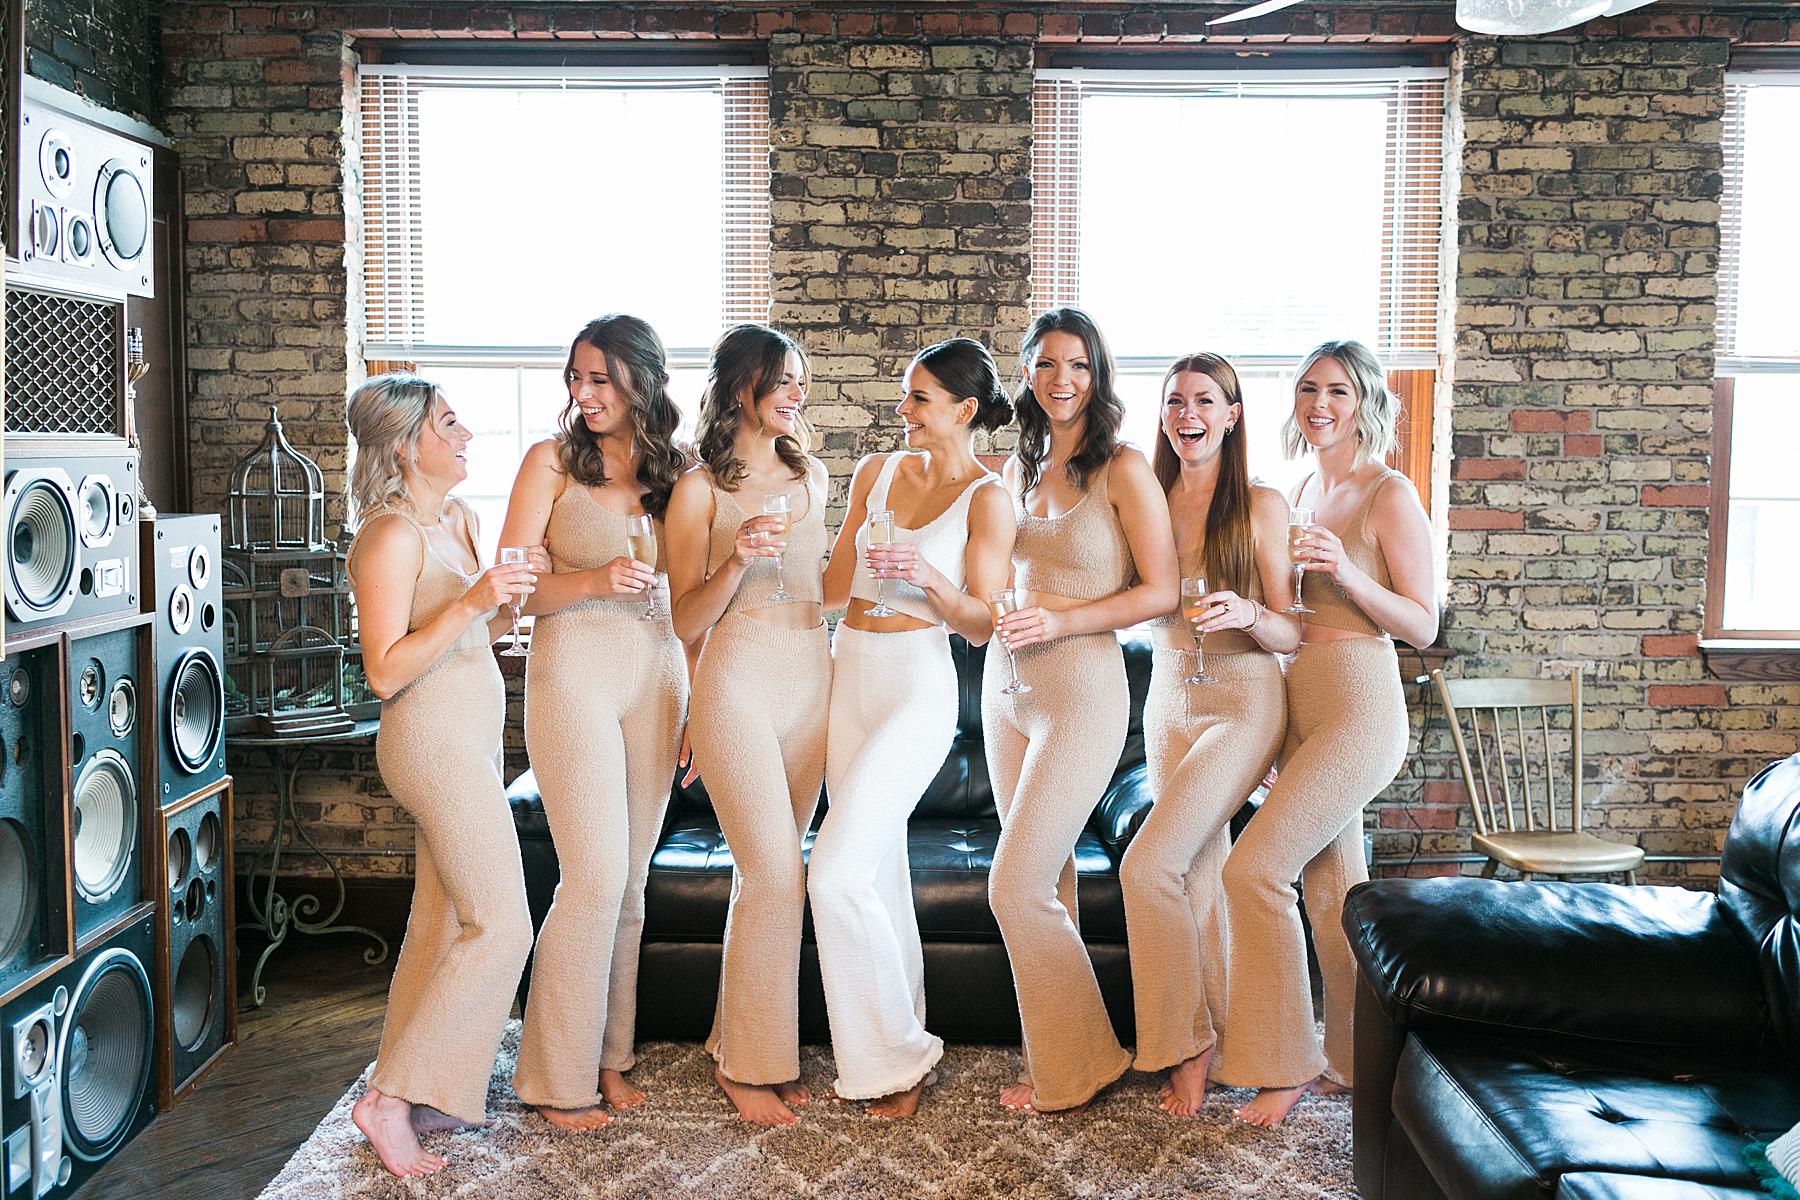 bride and bridesmaids champagne toast during getting ready prep time on wedding day